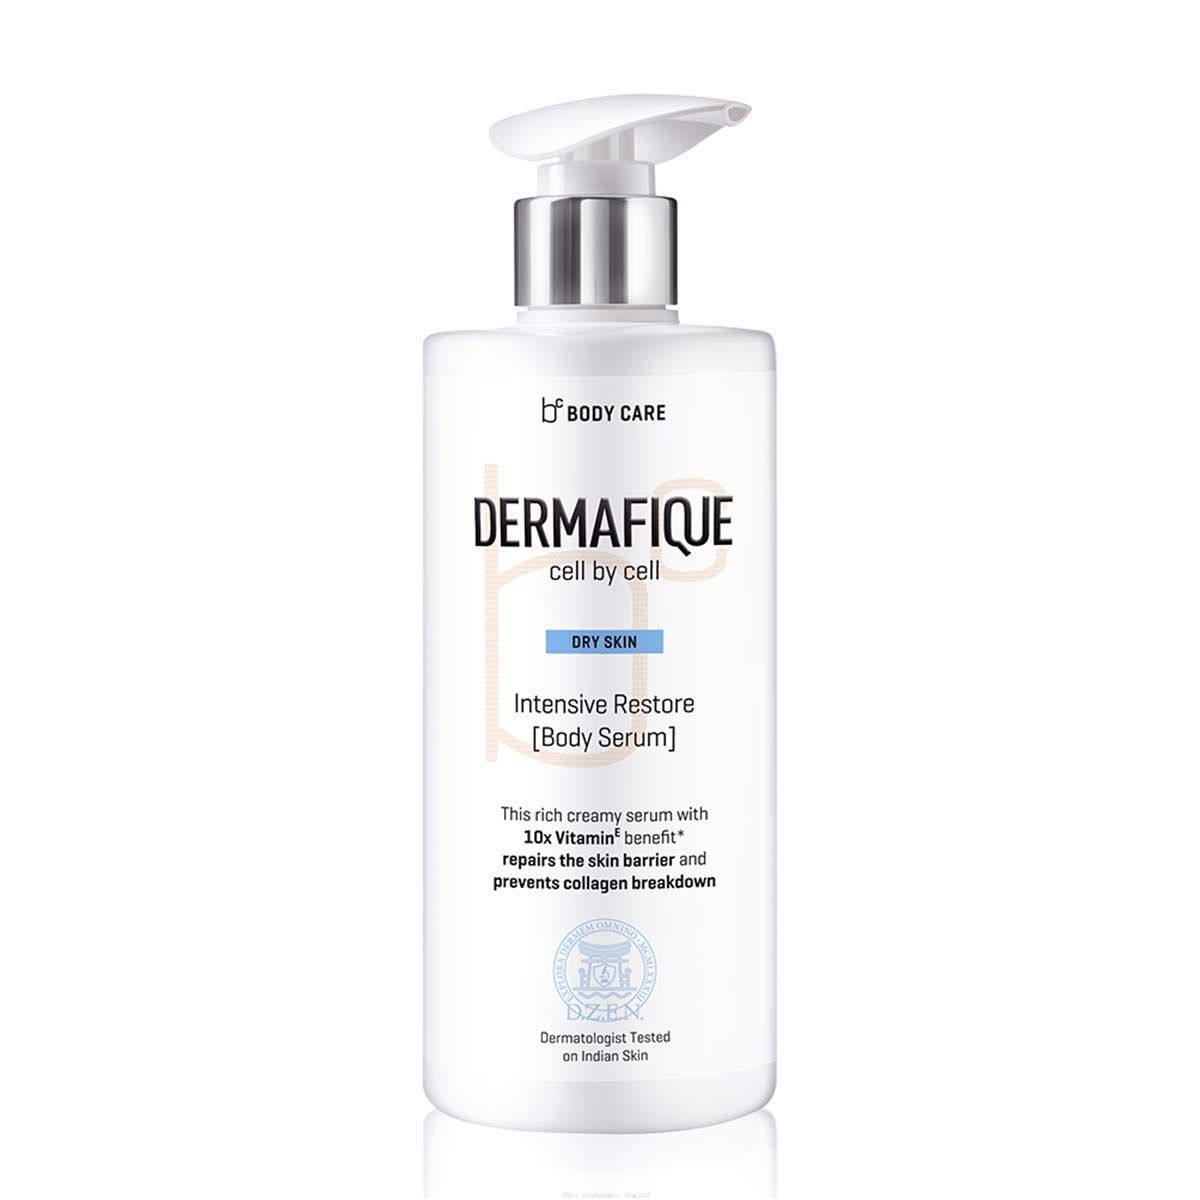 Buy Dermafique Intensive Restore Body Lotion Serum with Vitamin E – 300ml, Body Lotion for Dry Skin, with 10x Vitamin E Benefits & Deep Hydration - Purplle